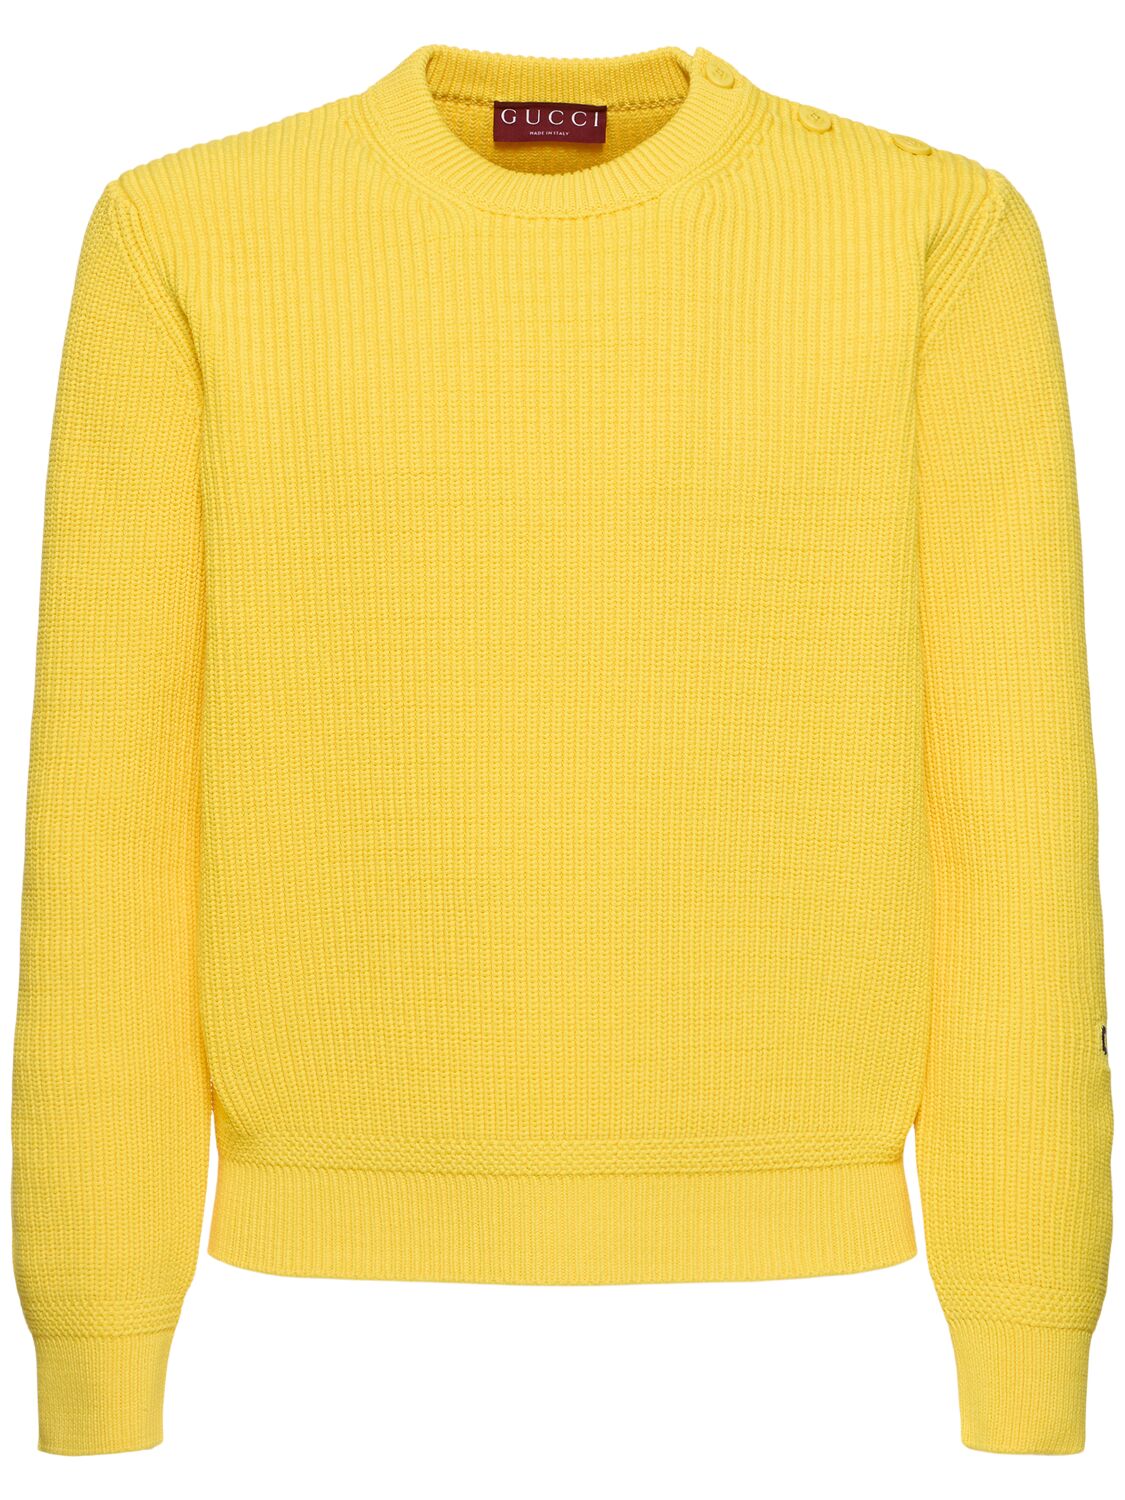 Gucci Logo Cotton Blend Crewneck Sweater In Yellow